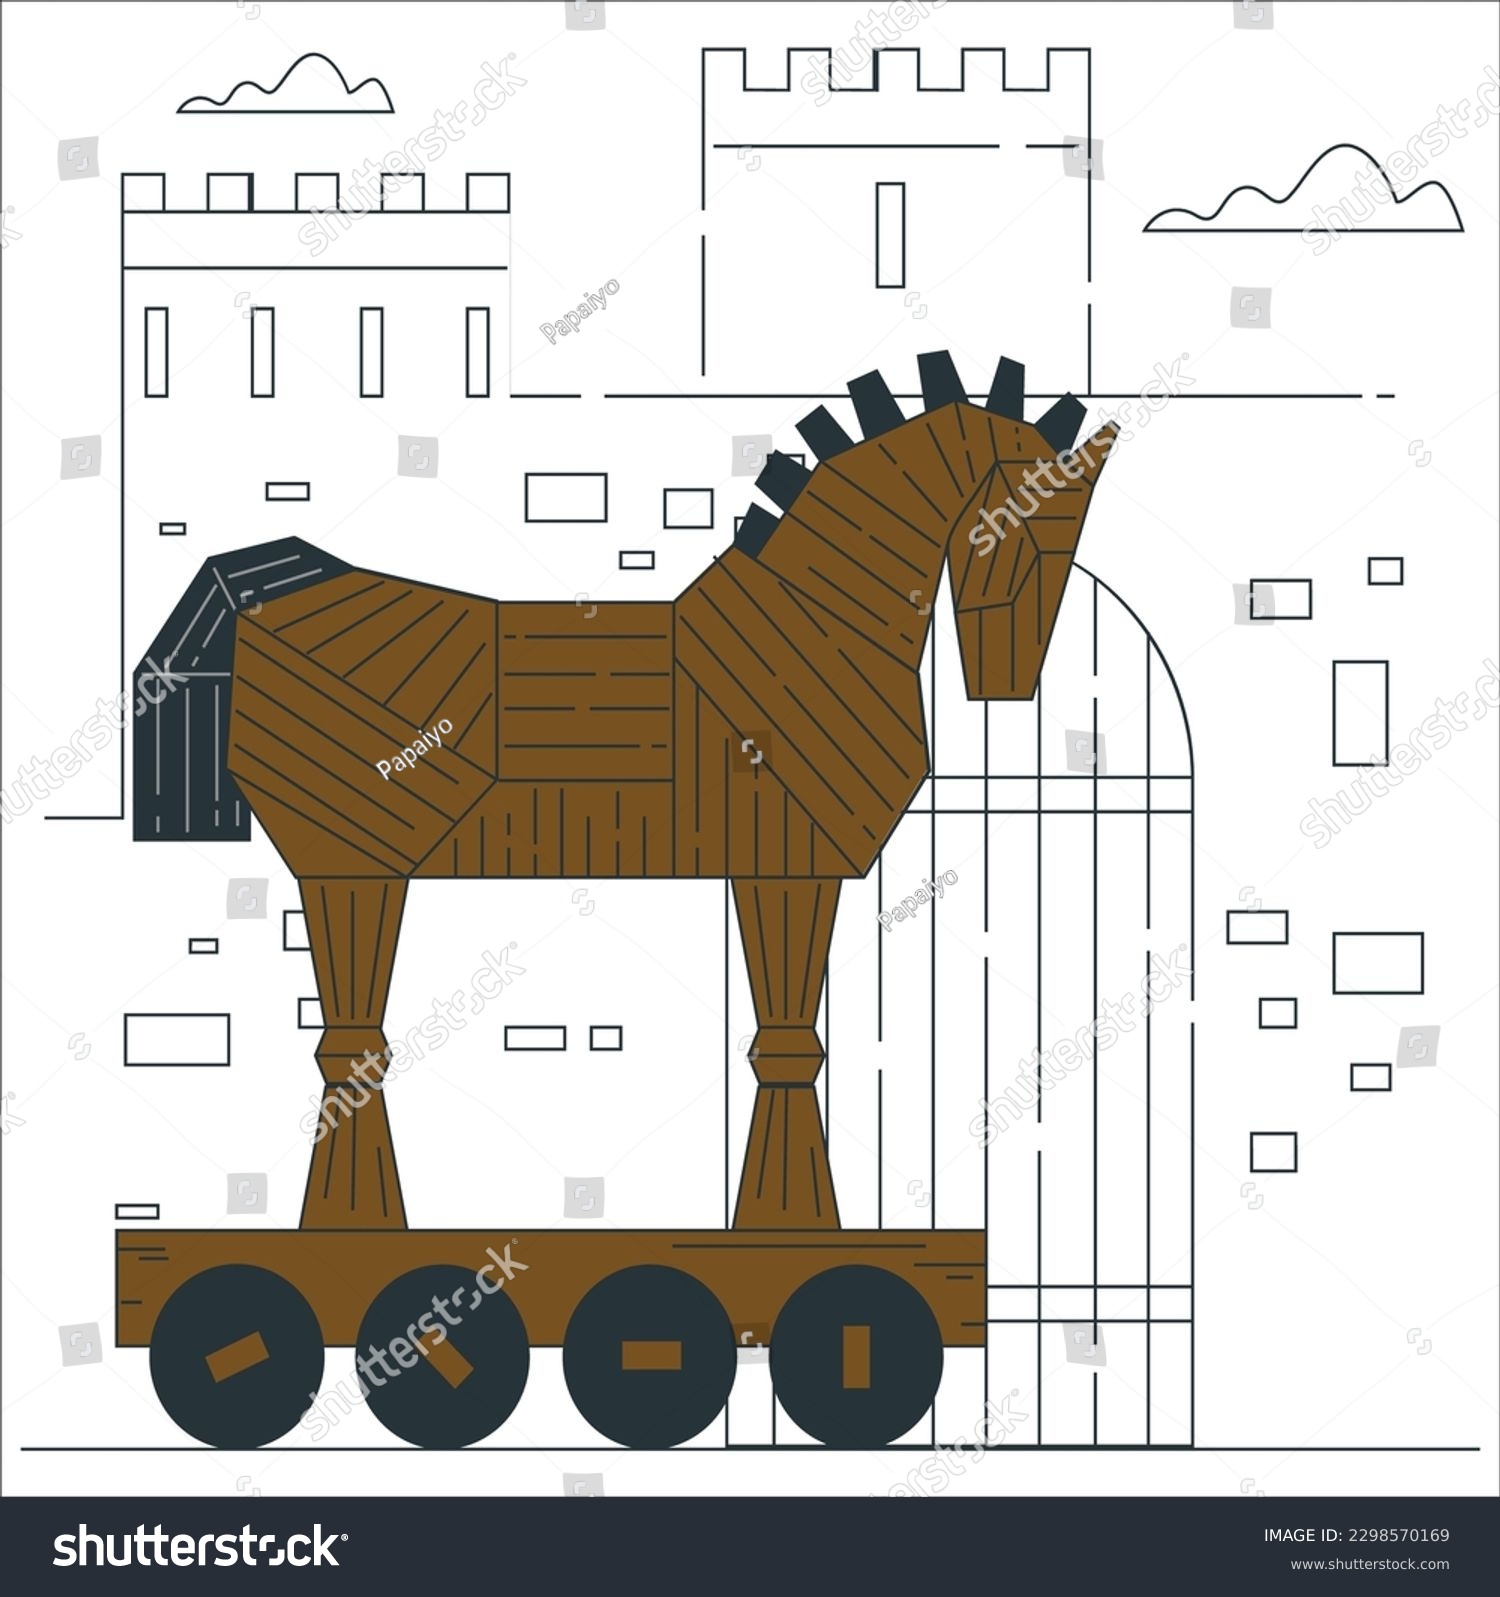 SVG of Wooden Horse, Trojan horse view. After the filming of the movie Troy,The wooden horse that was used as a prop was donated to the city. Trojan horse pop art retro vector svg